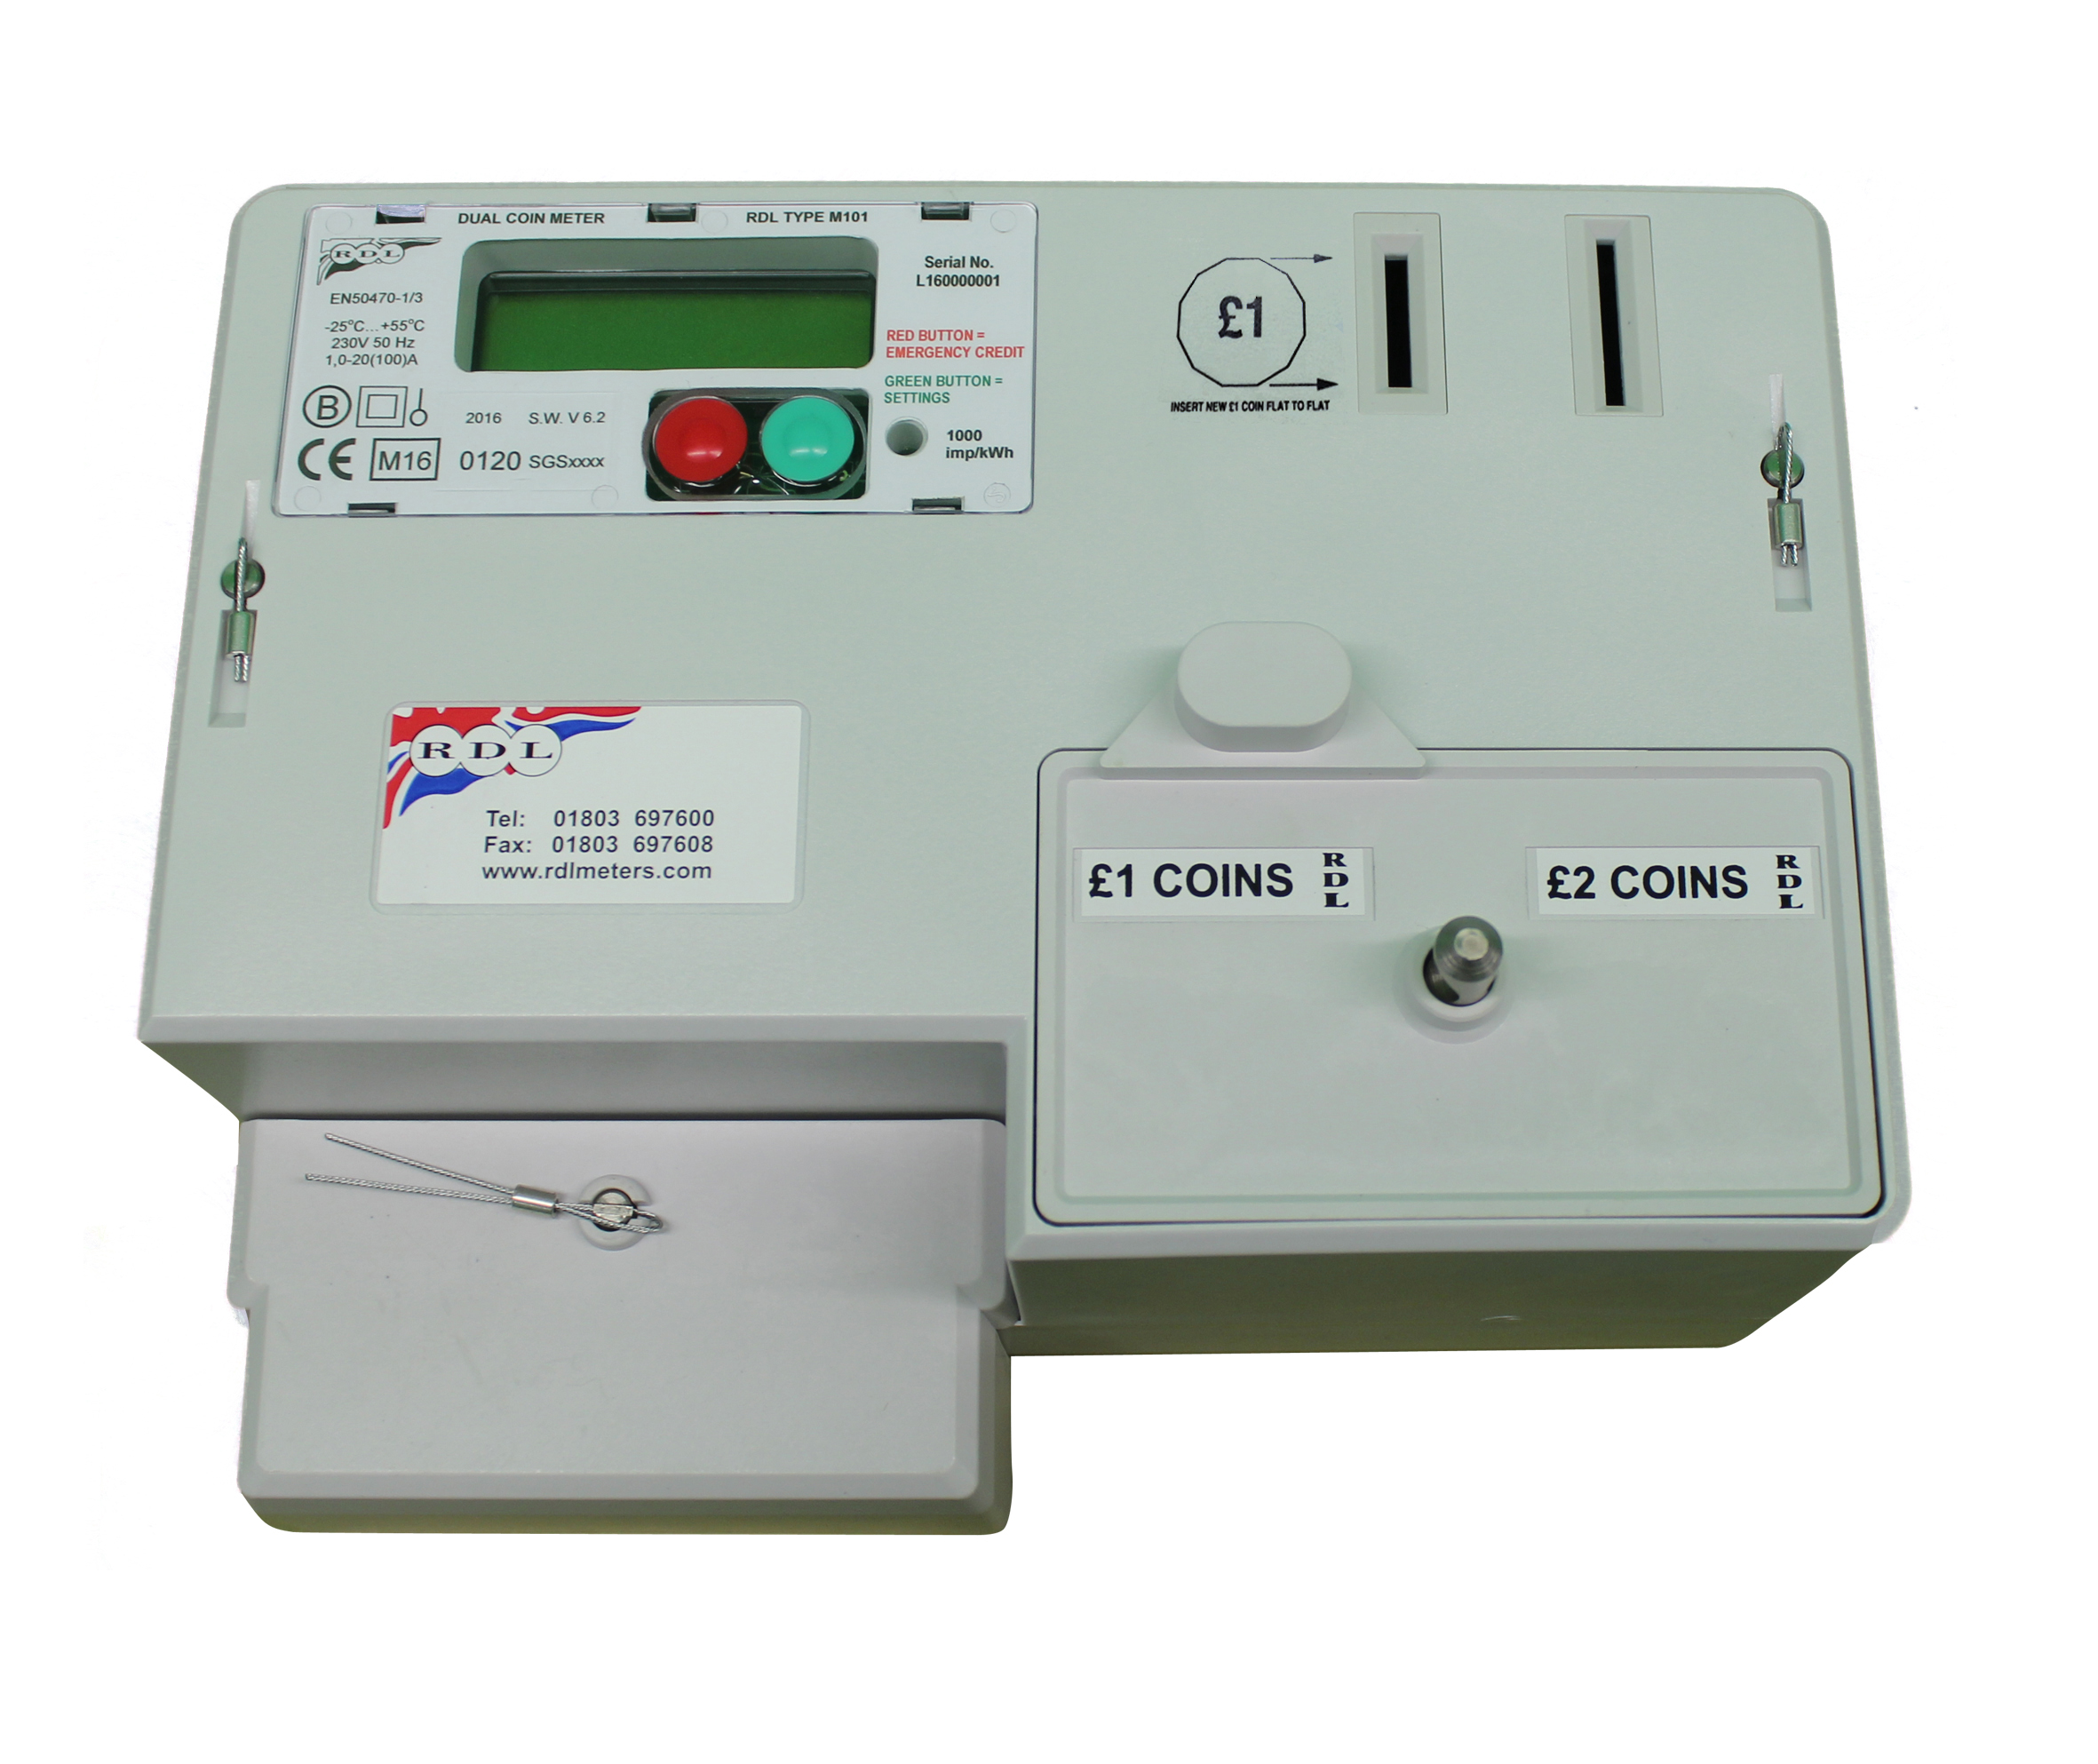 M-101S £1 & £2 Dual Coin Operated Meter/Timer